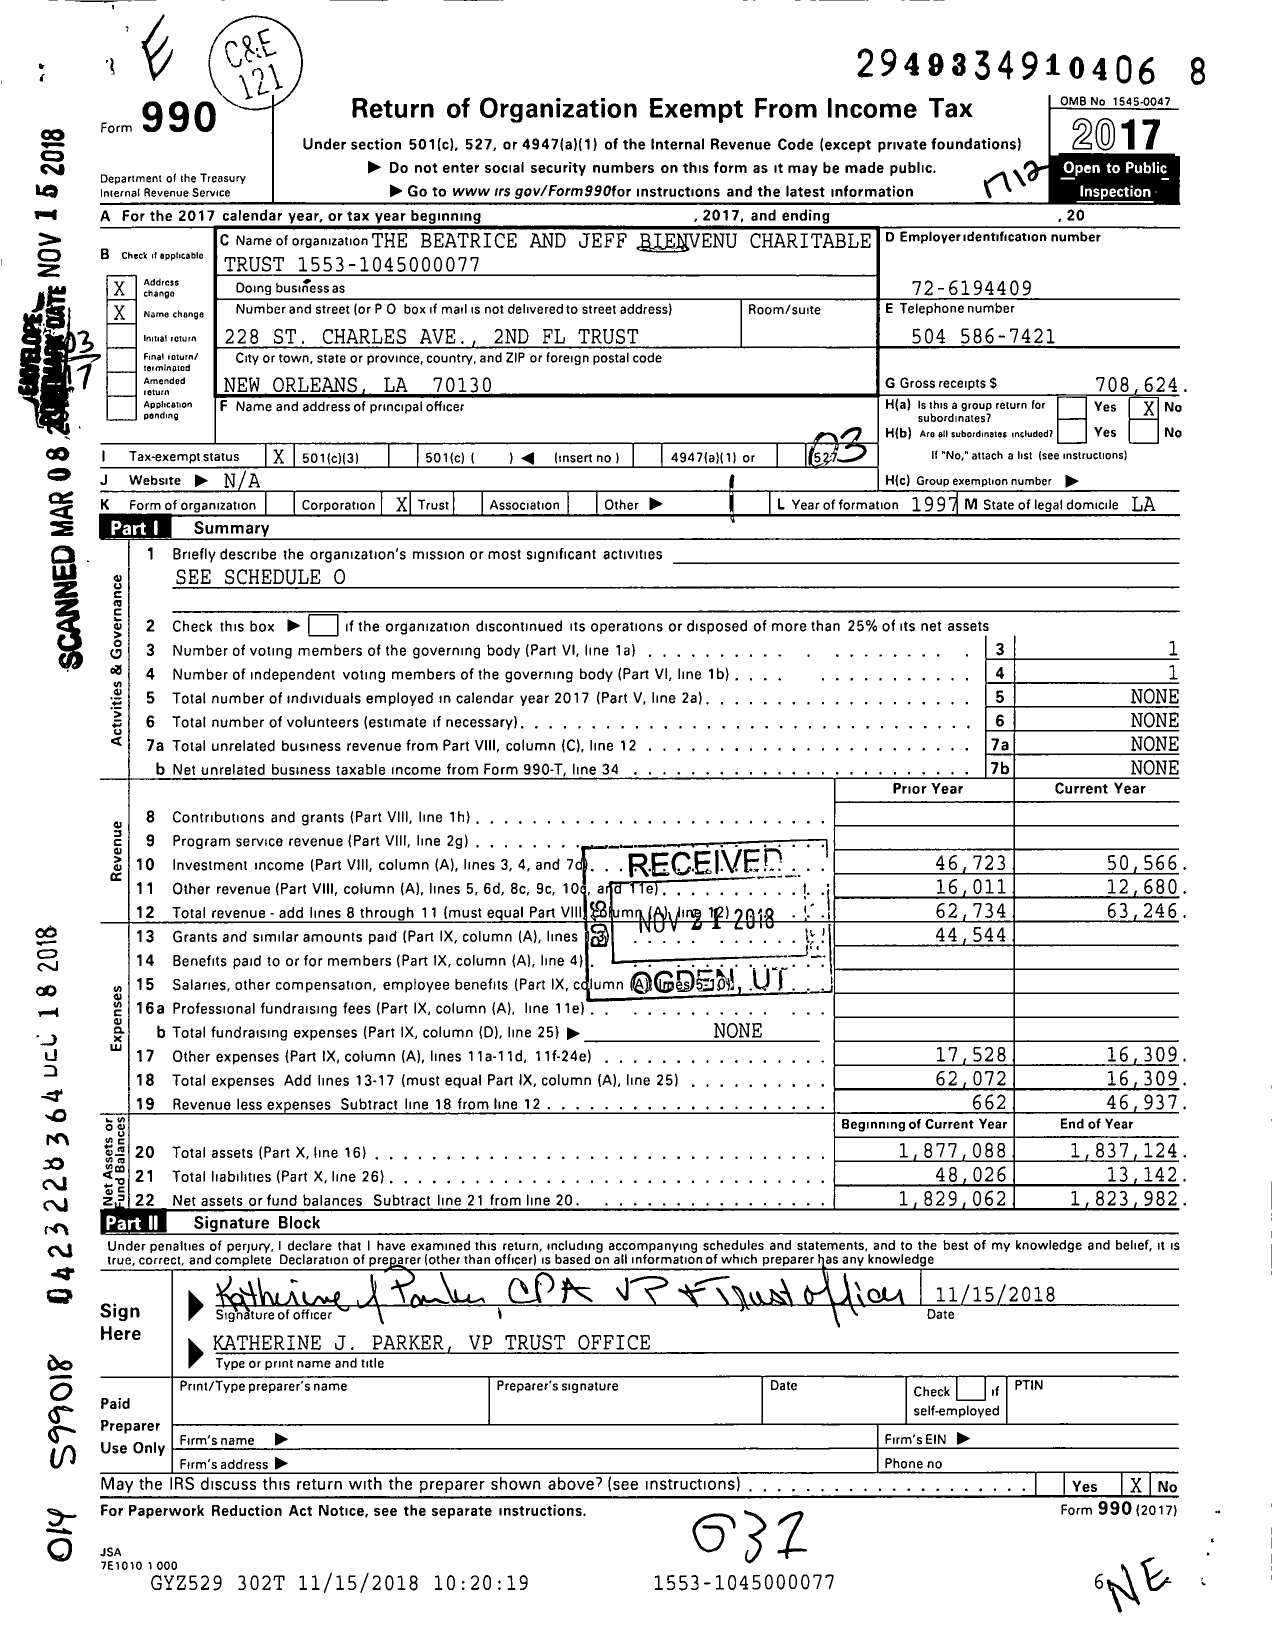 Image of first page of 2017 Form 990 for Beatrice and Jeff Bienvenu Charitable Trust